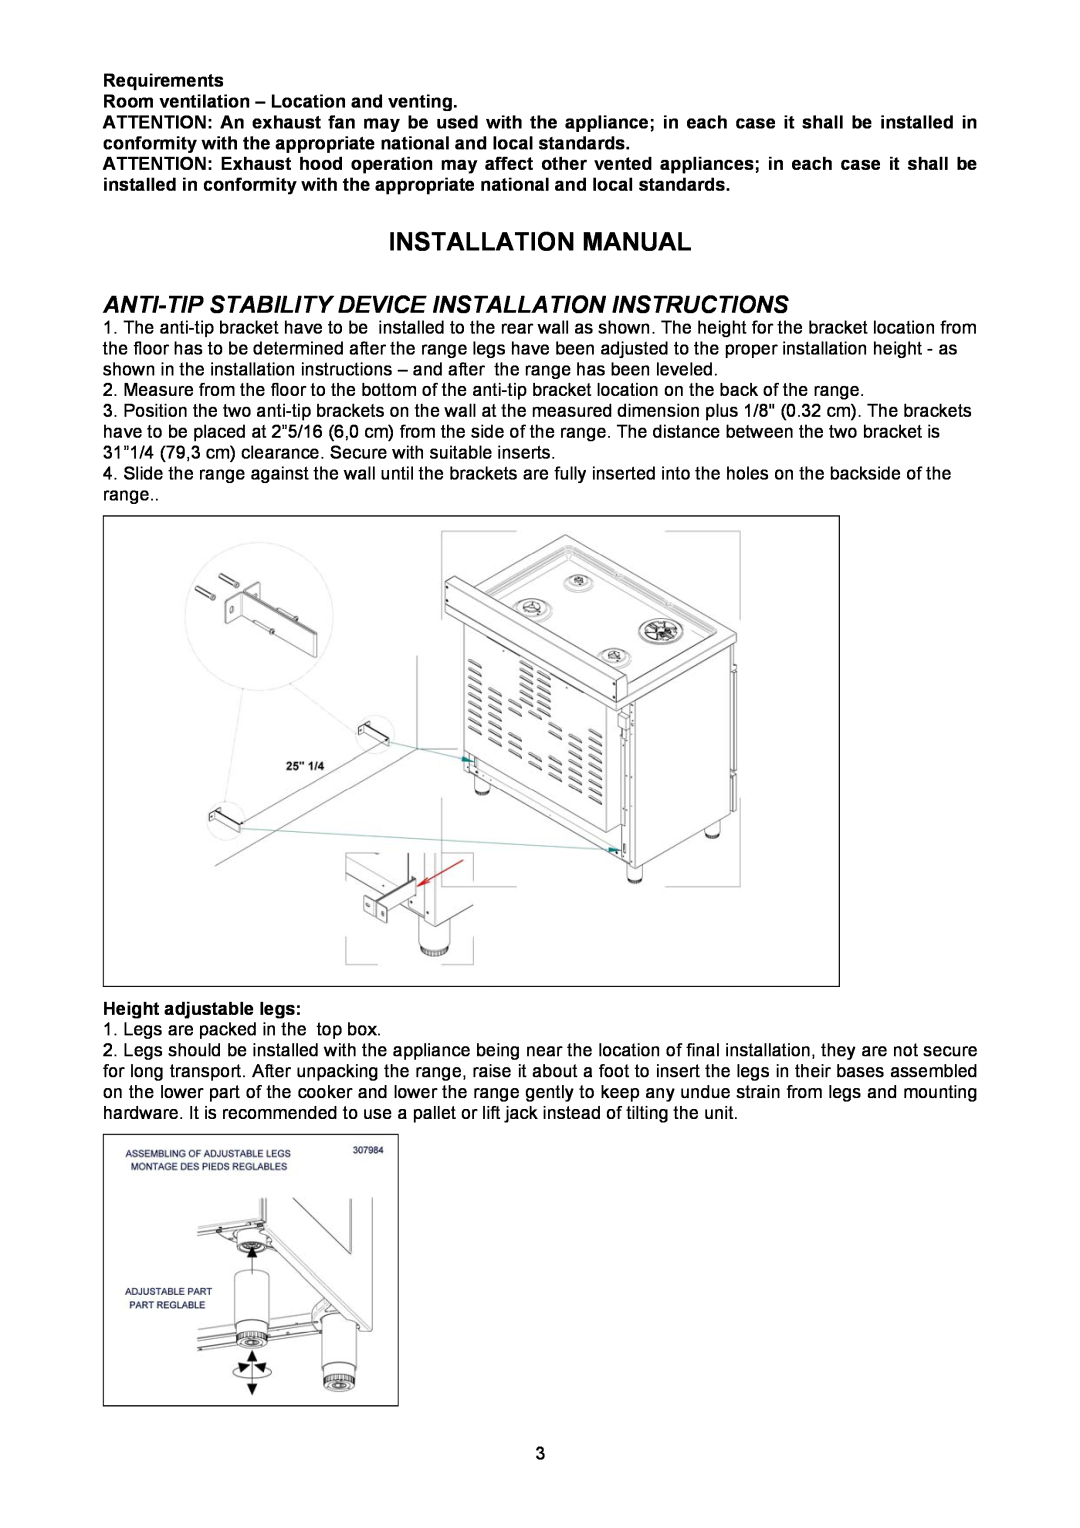 Bertazzoni X304GGVX Installation Manual, Requirements, Room ventilation - Location and venting, Height adjustable legs 